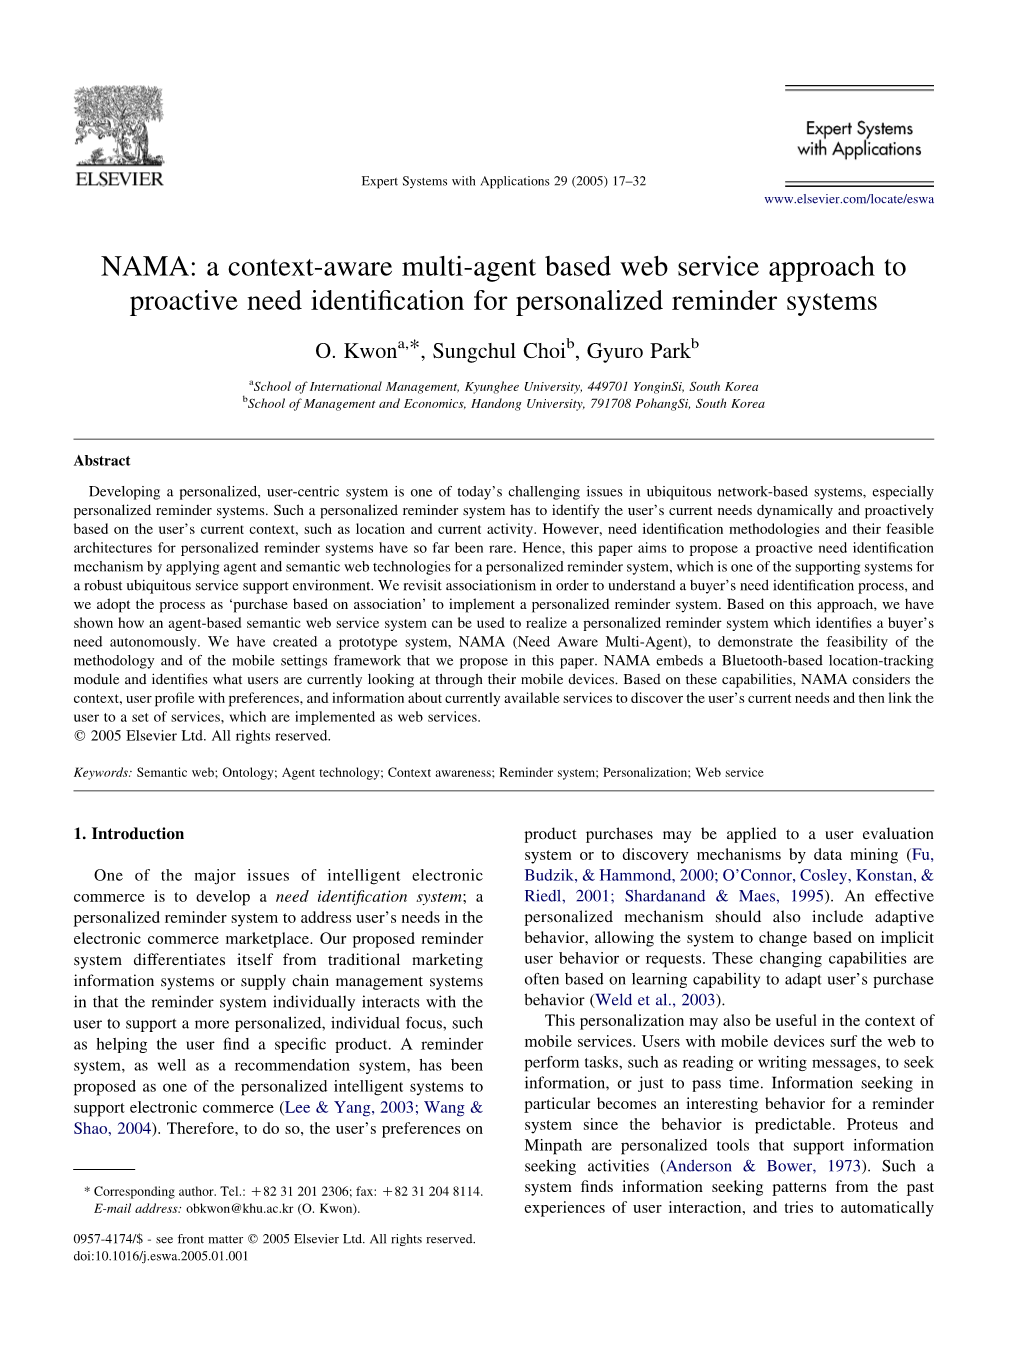 NAMA: a Context-Aware Multi-Agent Based Web Service Approach to Proactive Need Identiﬁcation for Personalized Reminder Systems